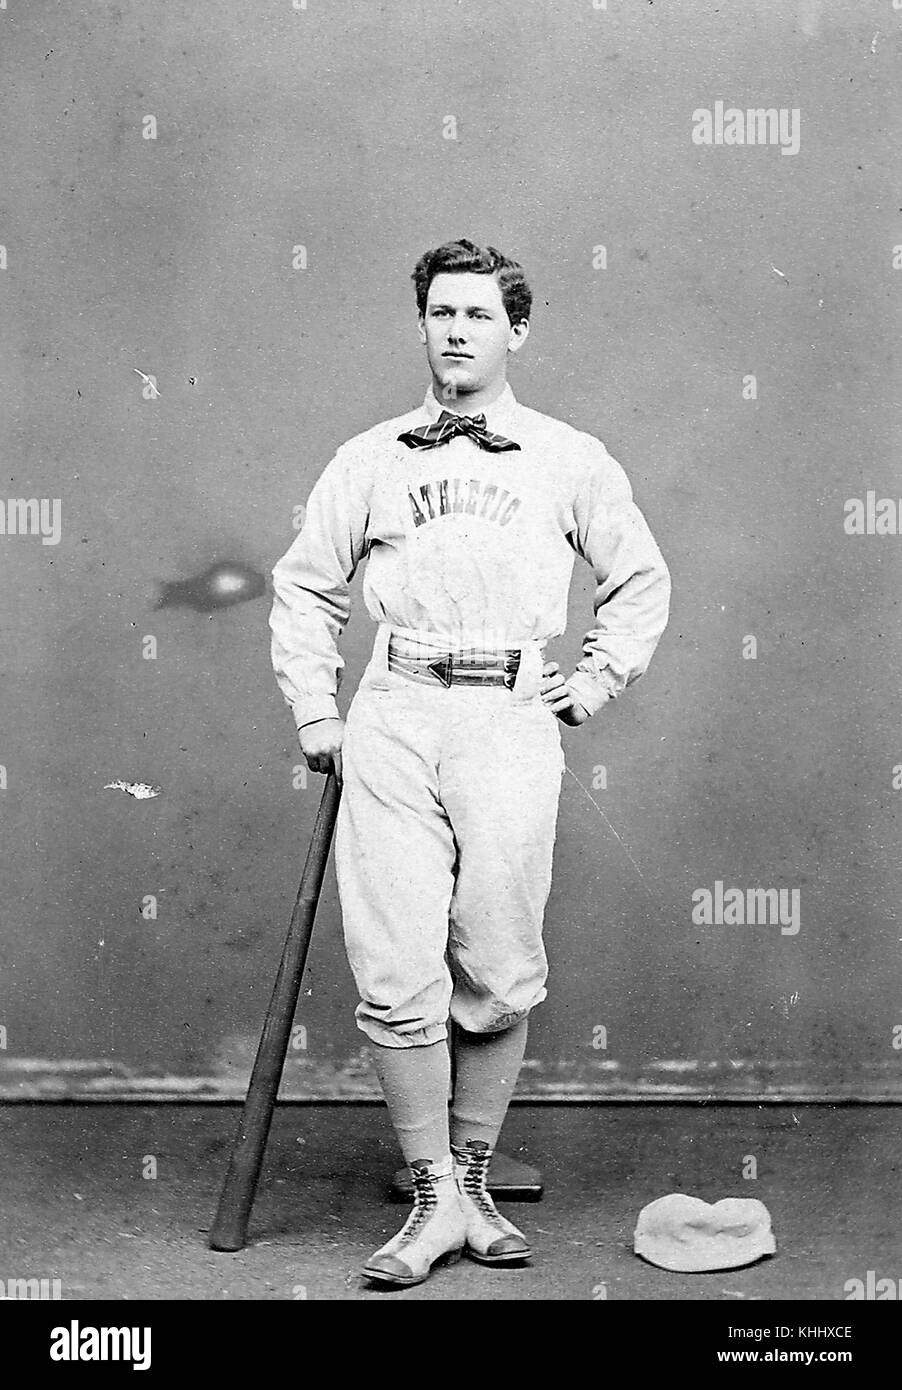 Portrait of Tim Murnane, extra first baseman for the Philadelphia Athletics, and sportswriter specializing in baseball, regarded as the leading baseball writer at The Boston Globe for about thirty years, photograph by Suppards, 1874. From the New York Public Library. Stock Photo